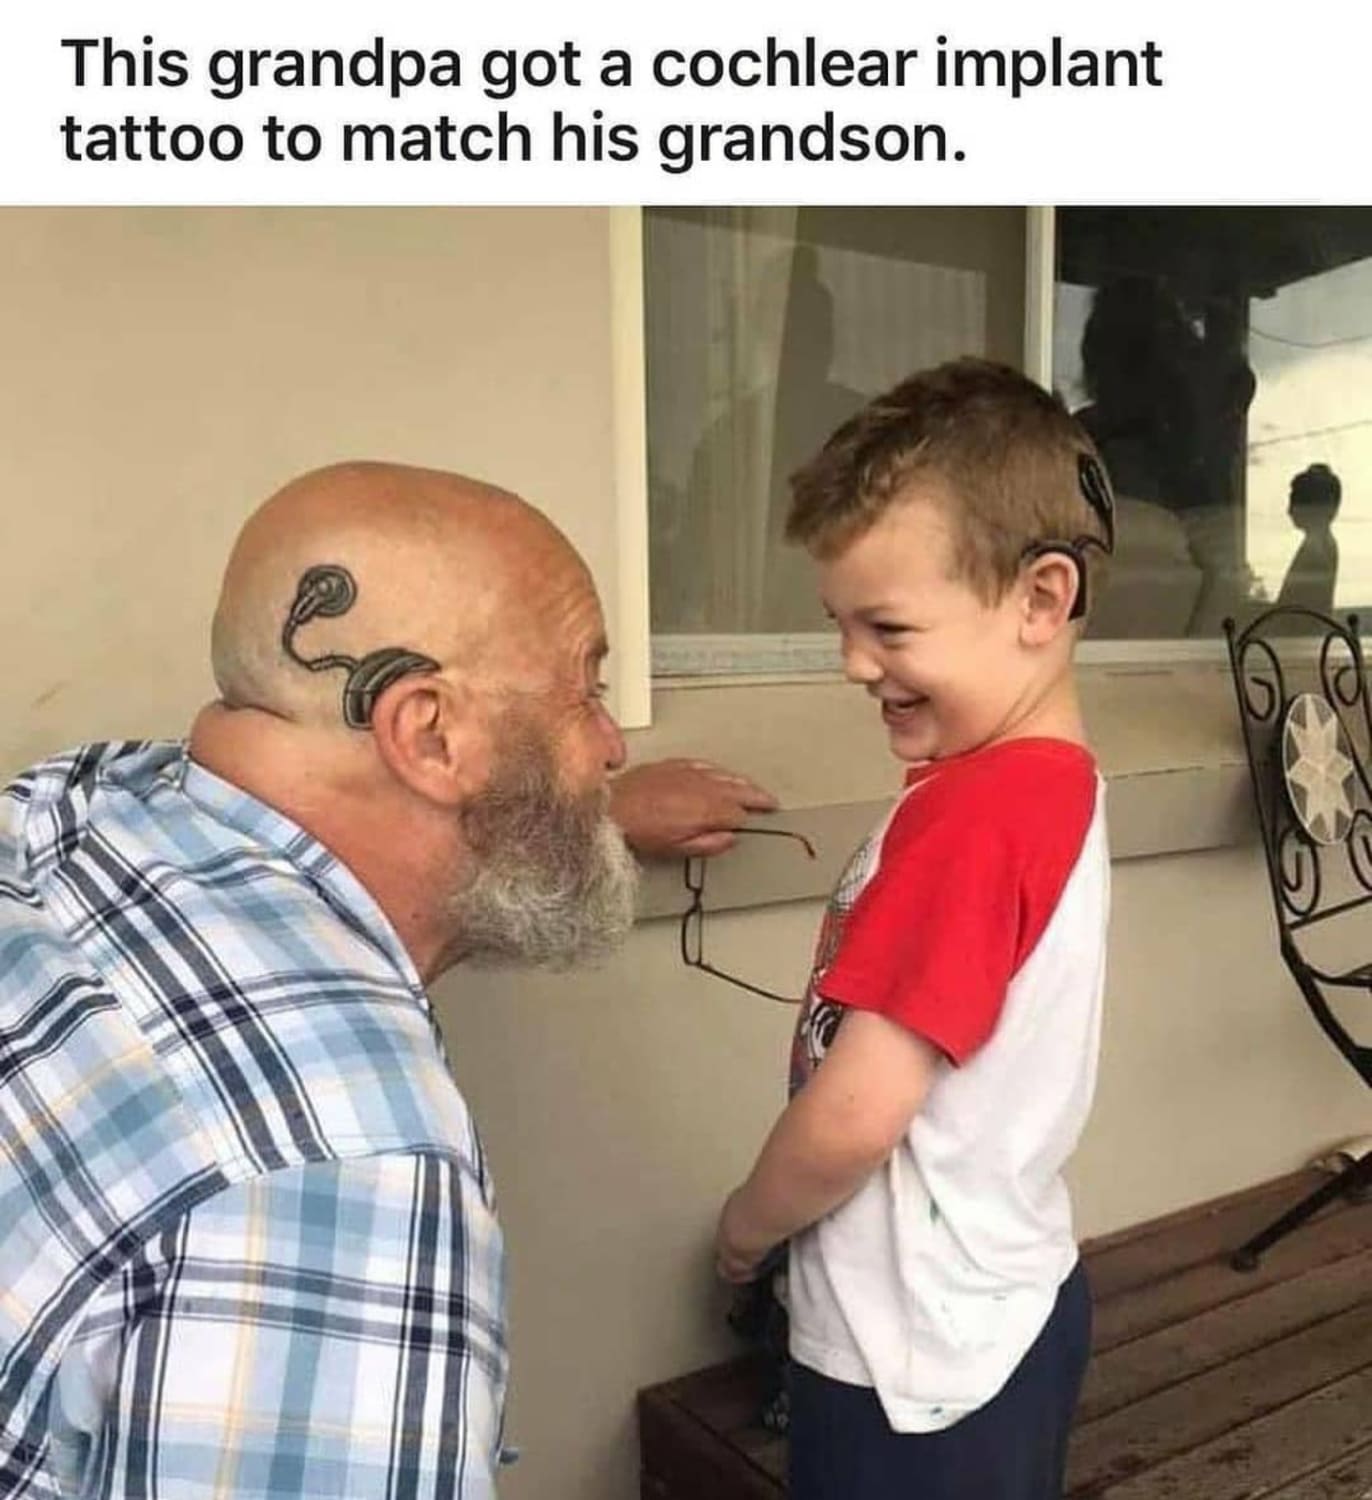 Respect for our grandparents.